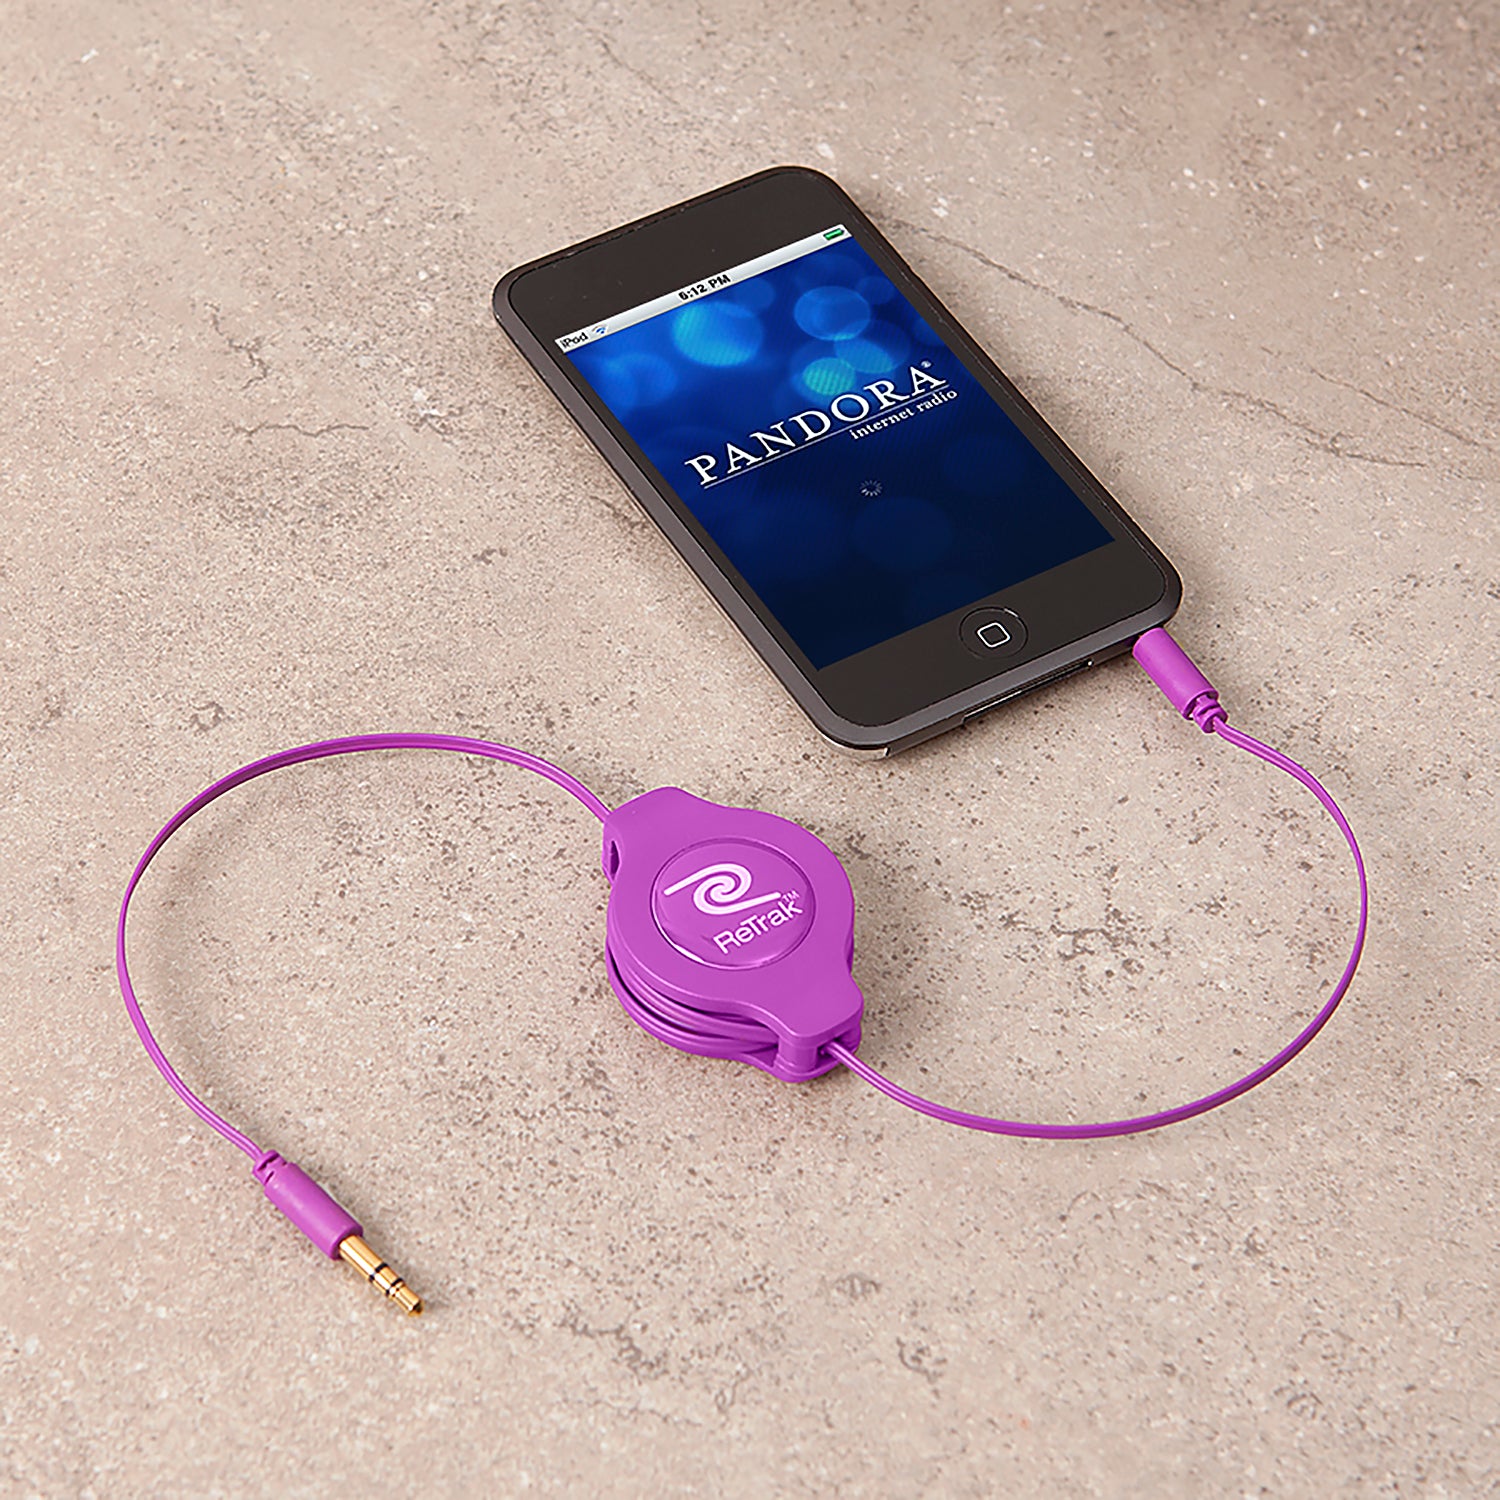 Audio Auxiliary Cable | Aux Cord | Retractable Cord | Purple